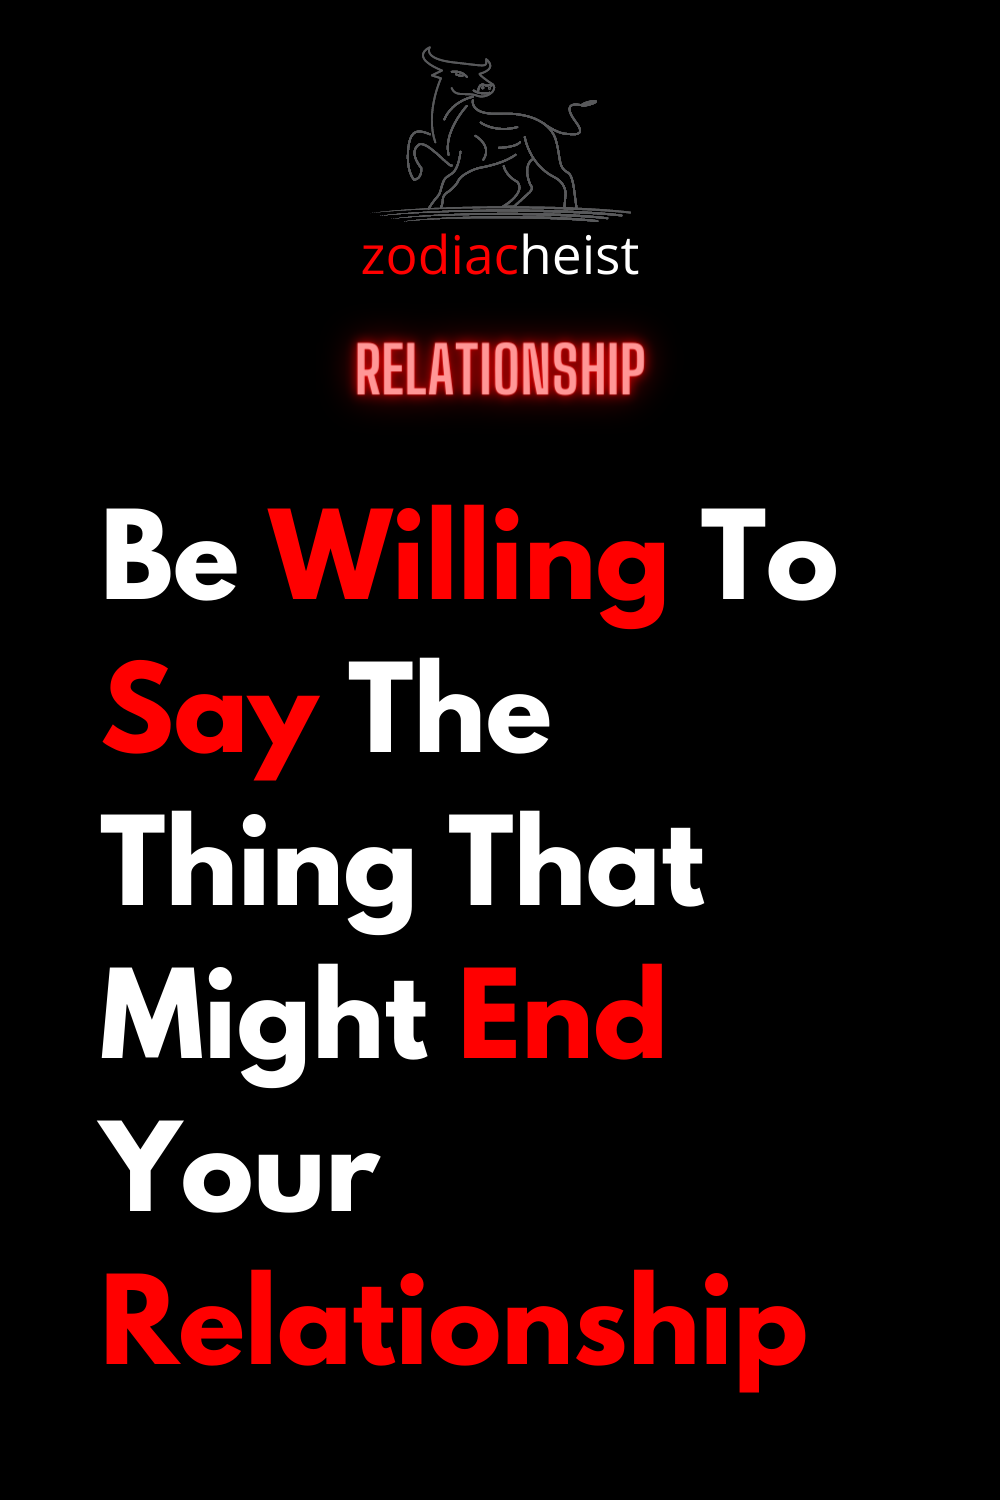 Be Willing To Say The Thing That Might End Your Relationship